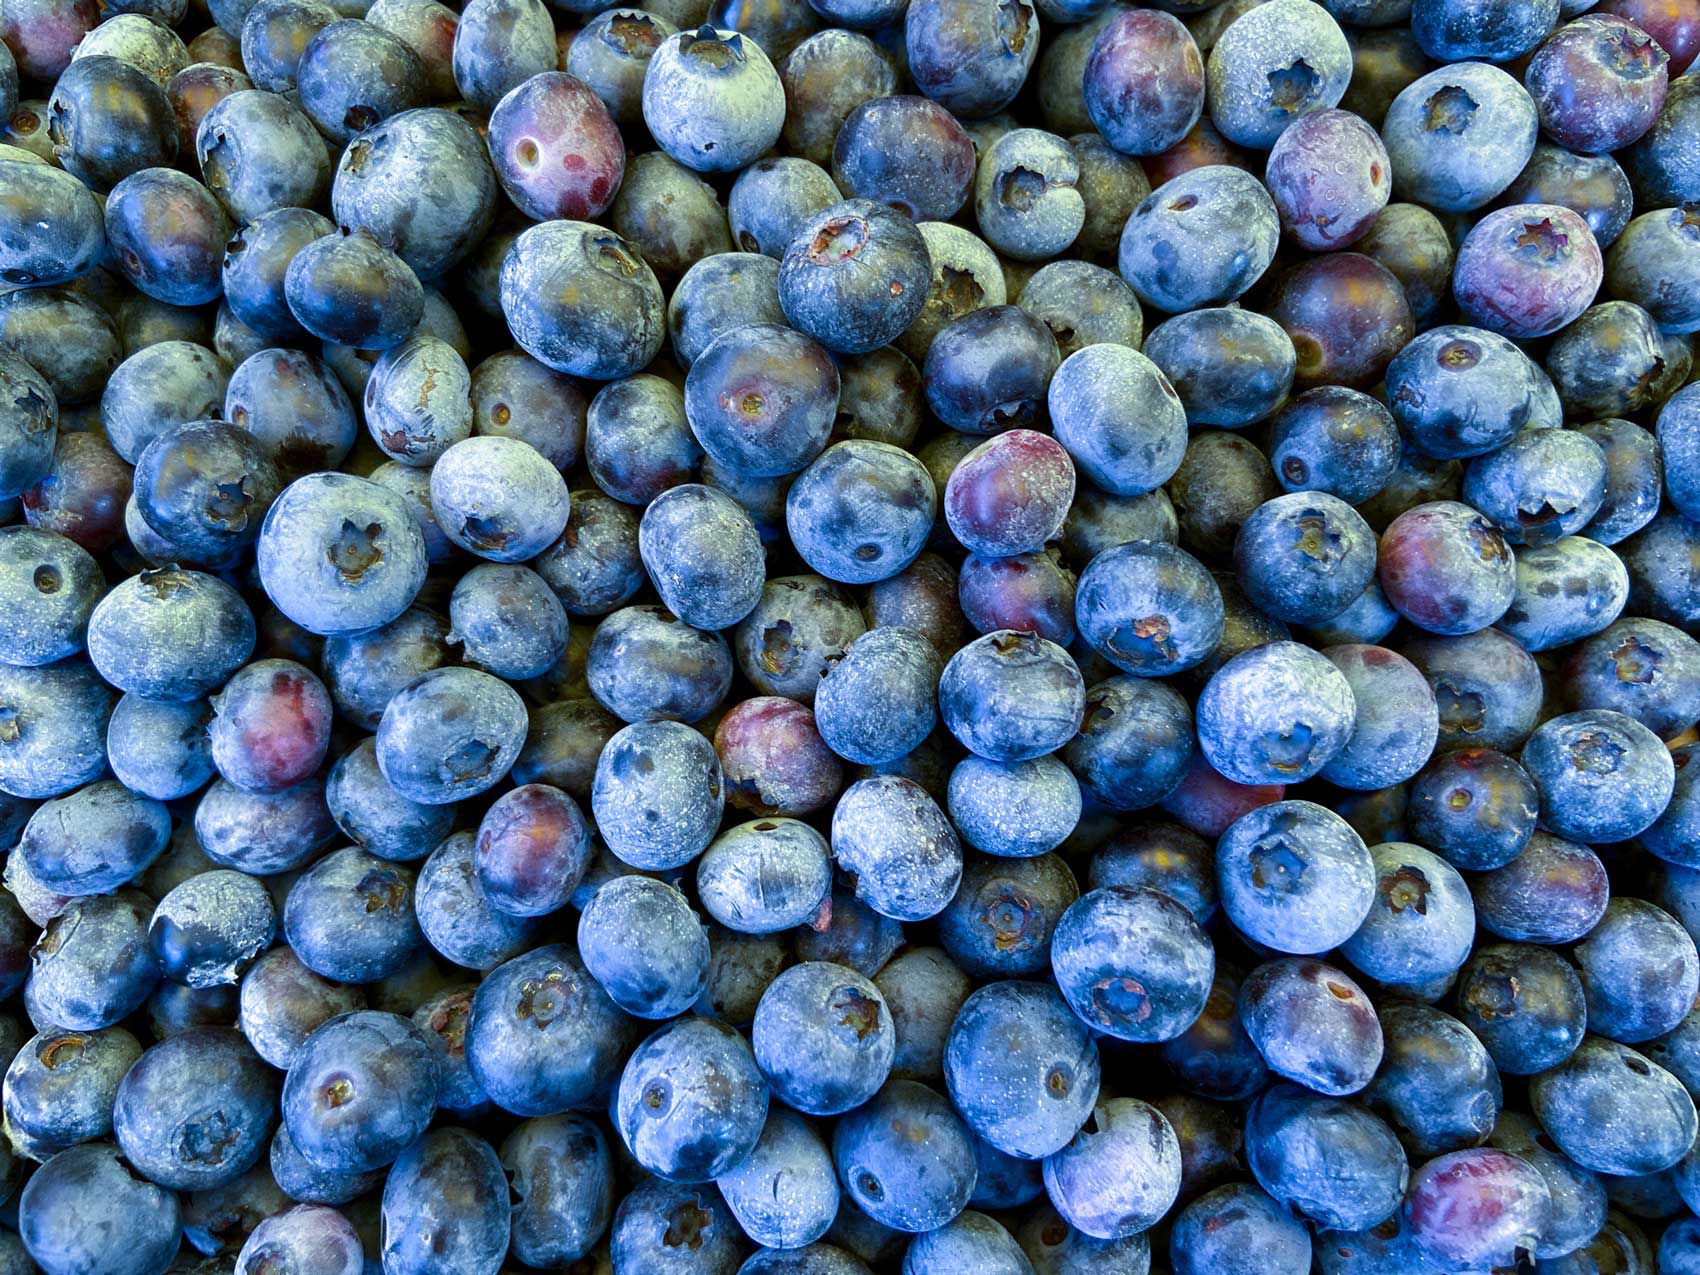 A close-up of clean, fresh blueberries.